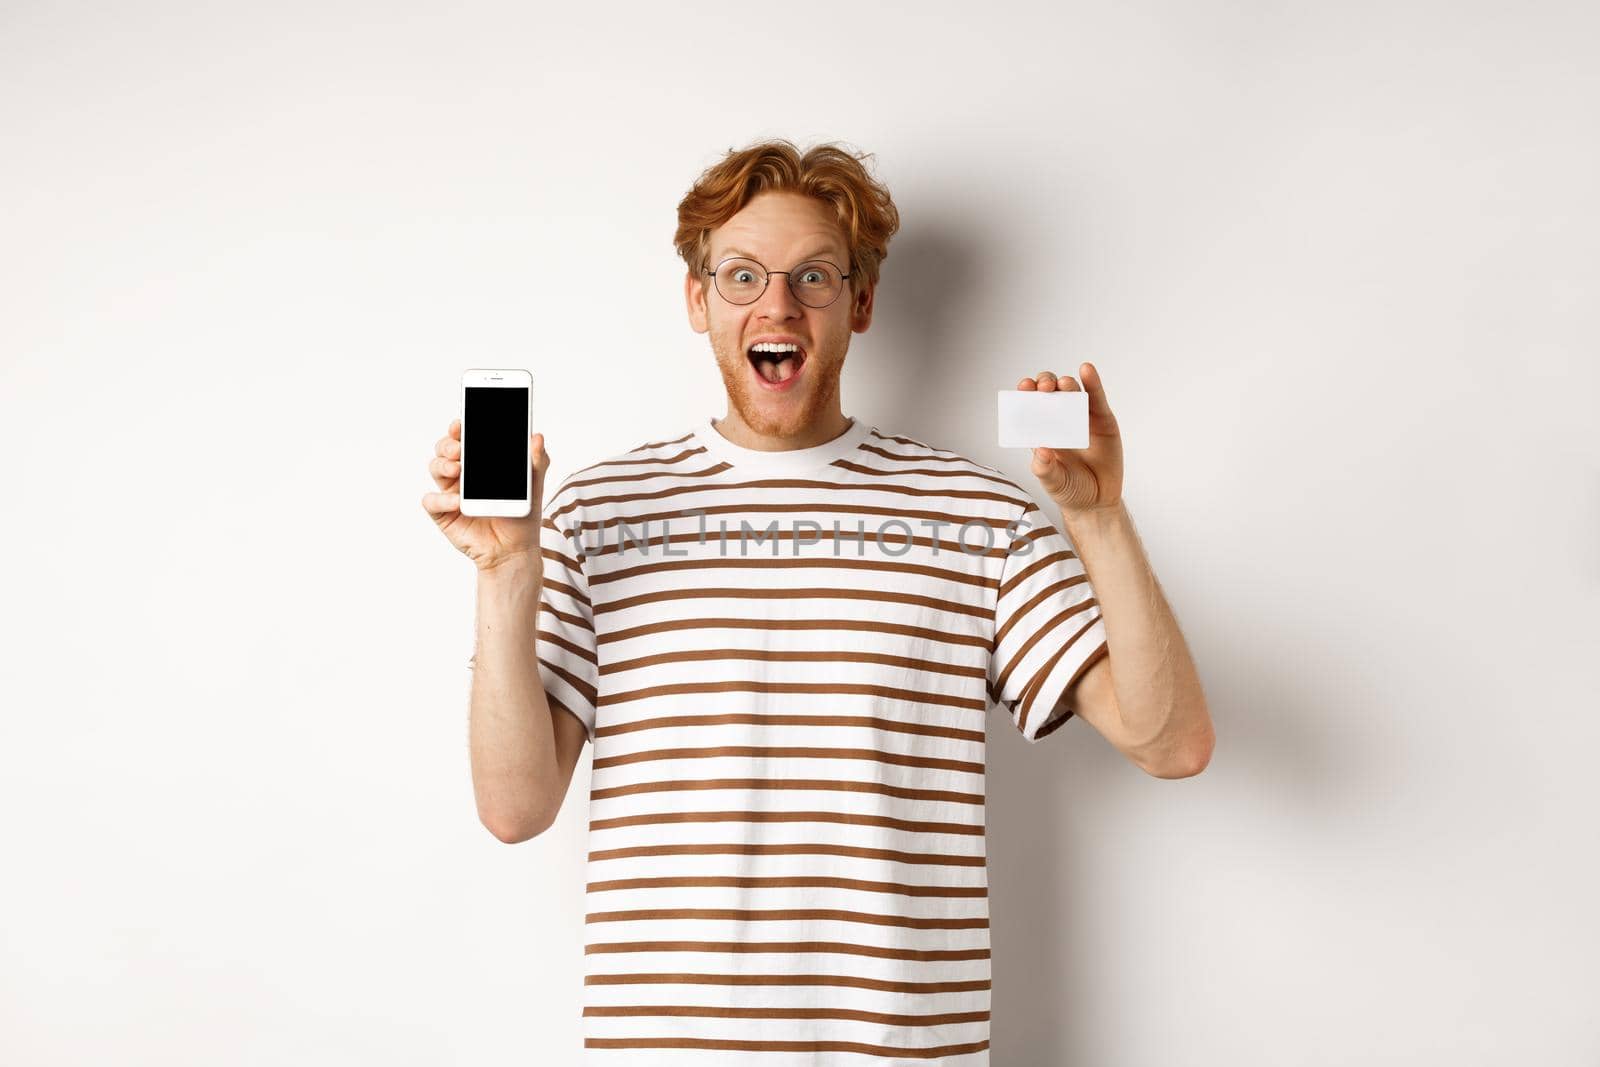 Shopping and finance concept. Young man showing blank mobile screen and plastic credit card, smiling at camera, white background.